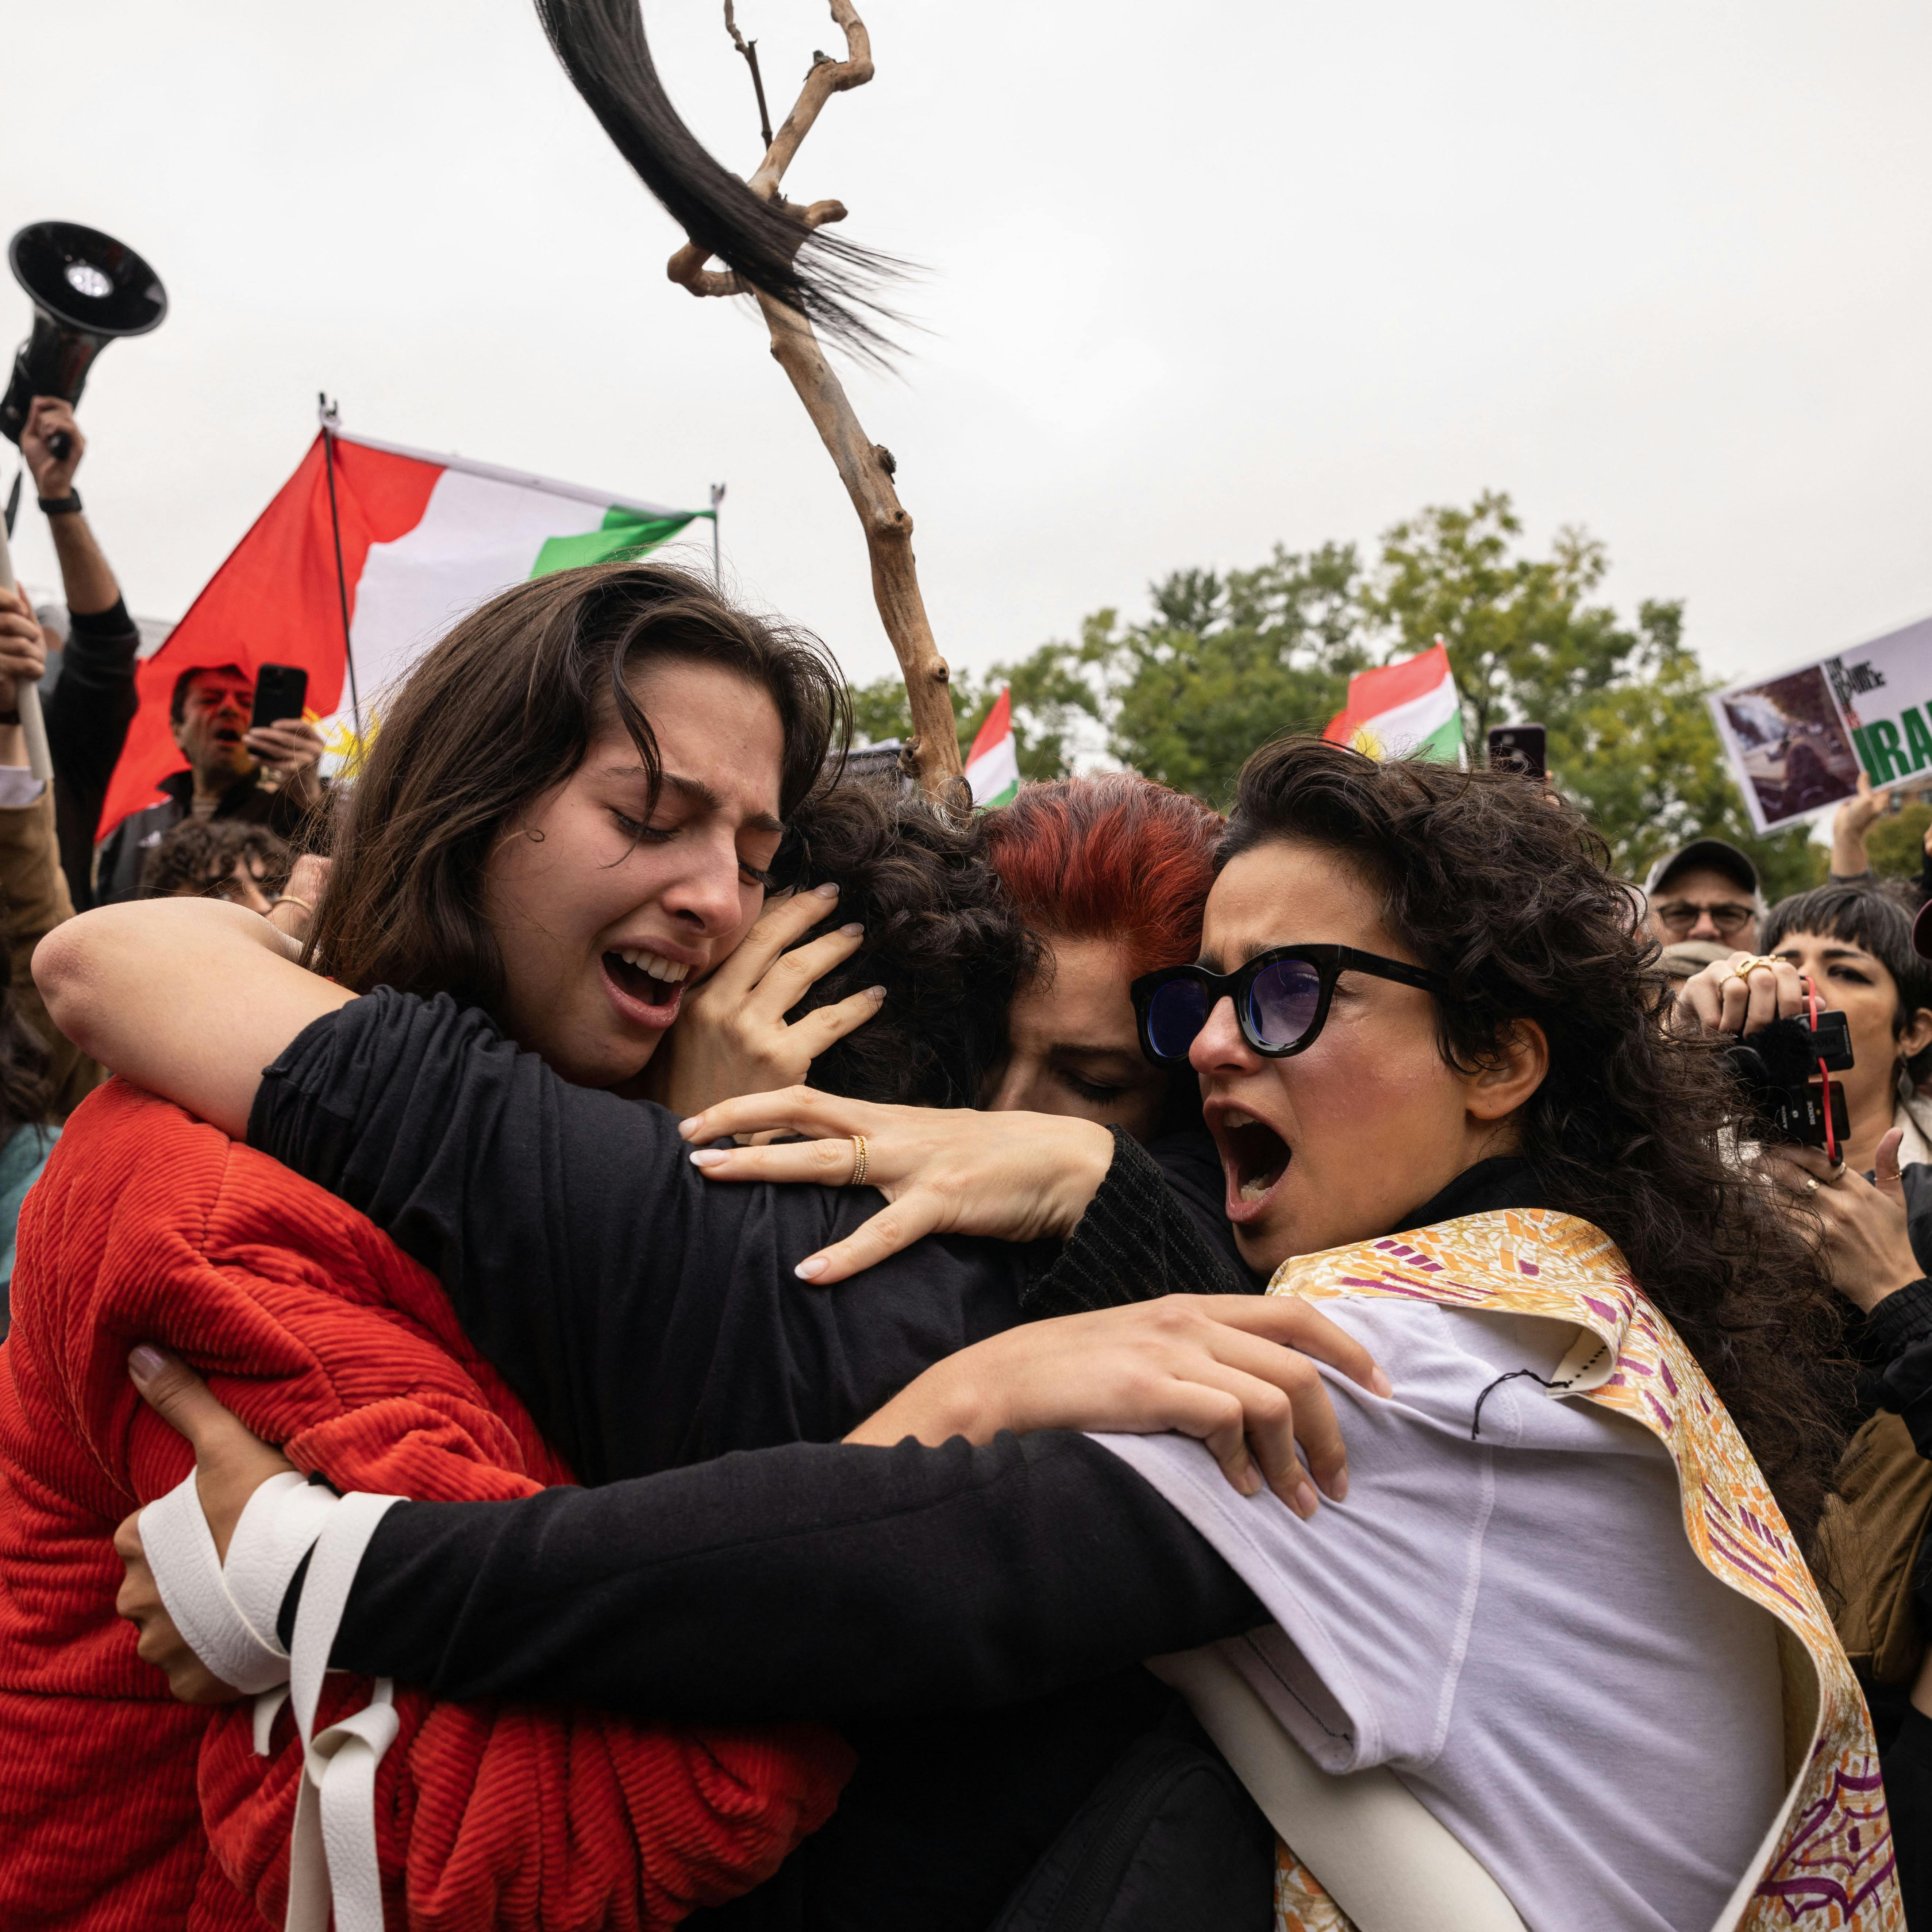 Activists hug each other after cutting their hair in protest over the death of Mahsa Amini in the custody of the Iran's notorious morality police in New York on October 1, 2022. Yuki IWAMURA / AFP